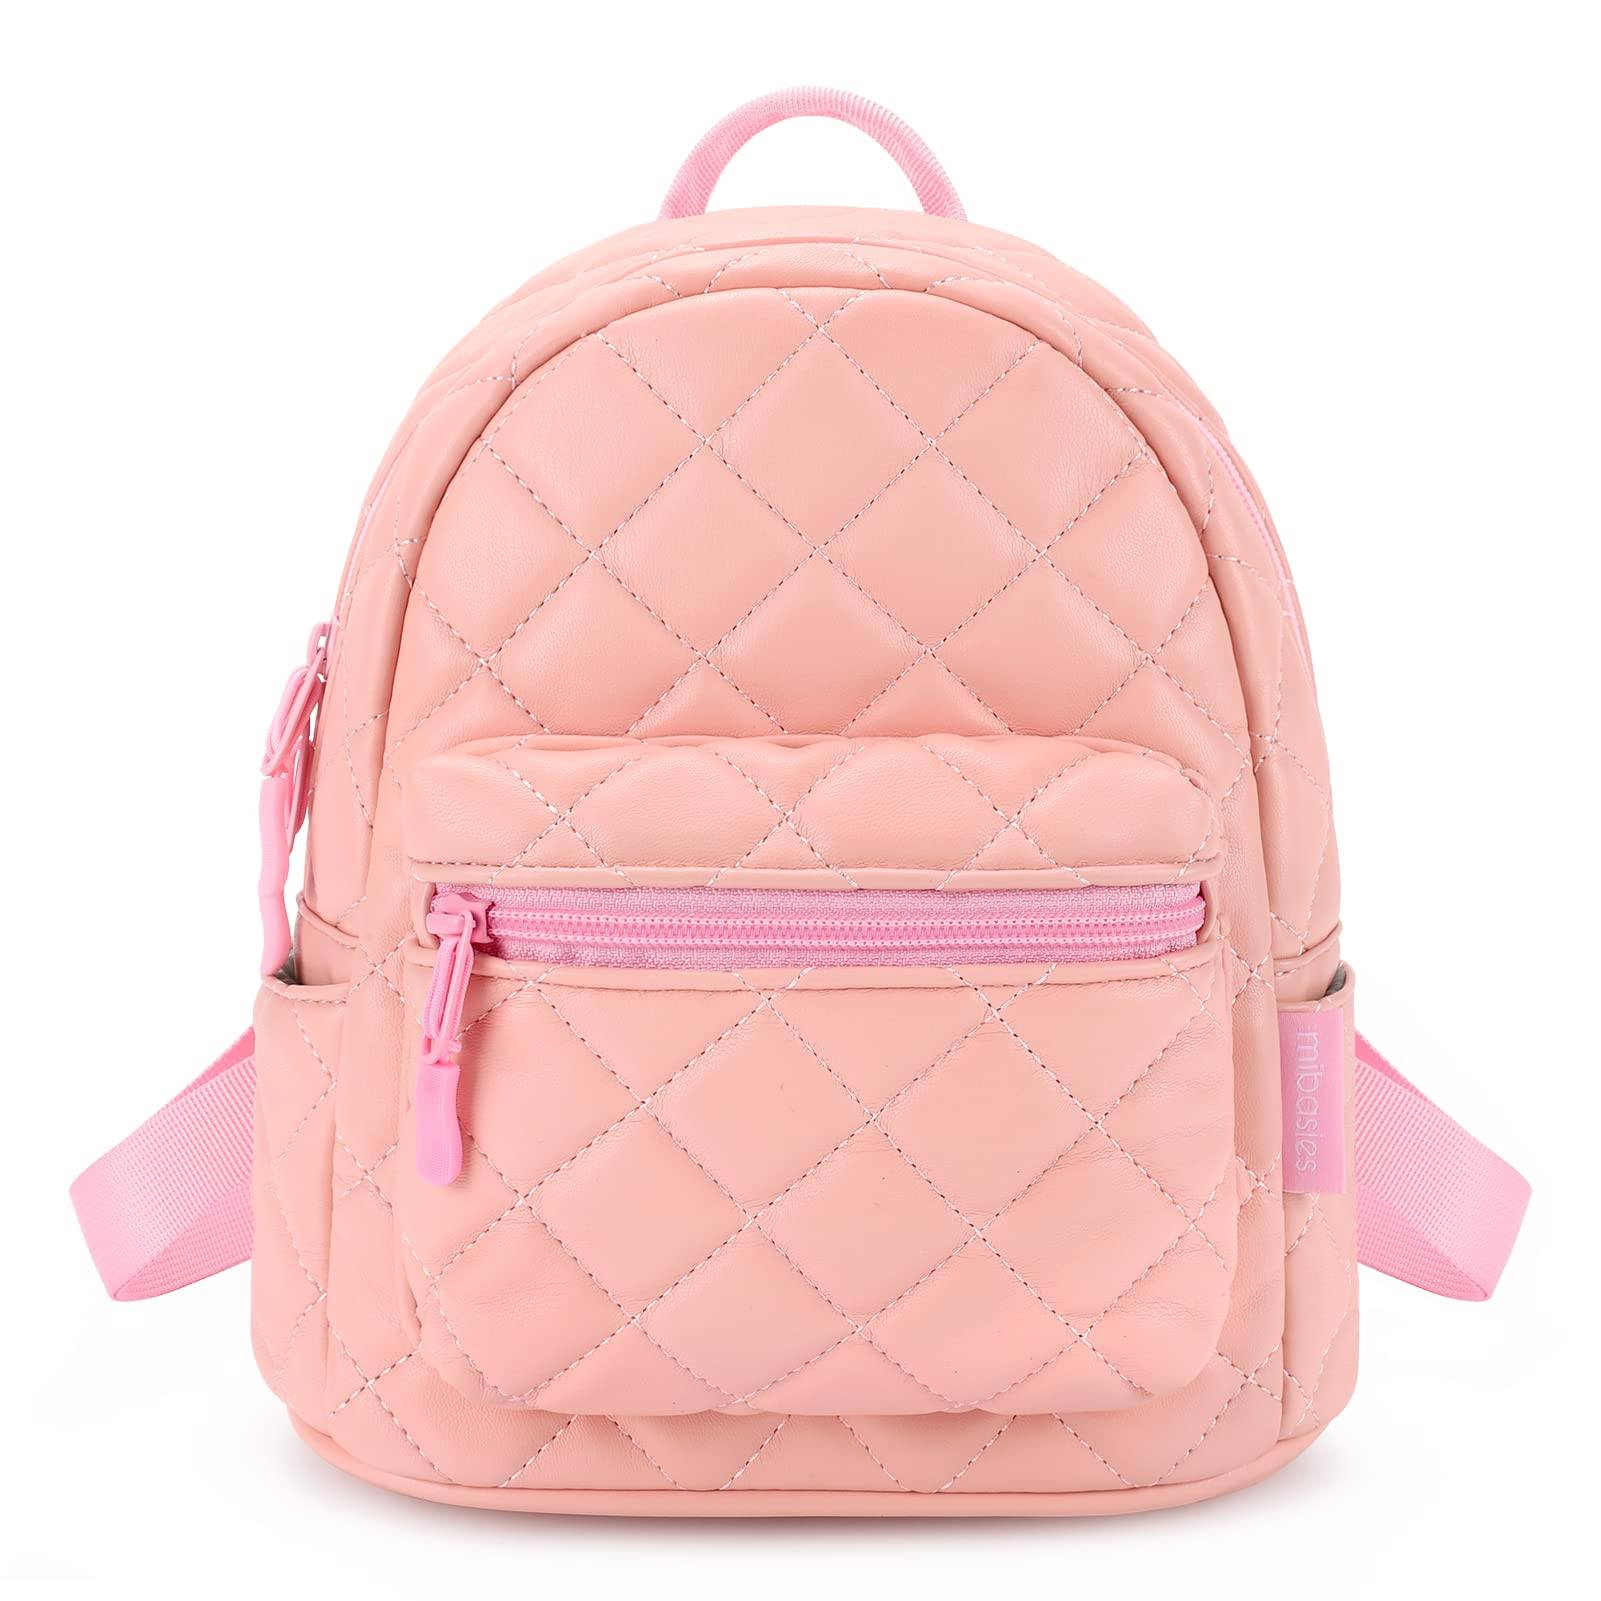 Pink Leather Purse | Pink Leather Backpack - Qisabags